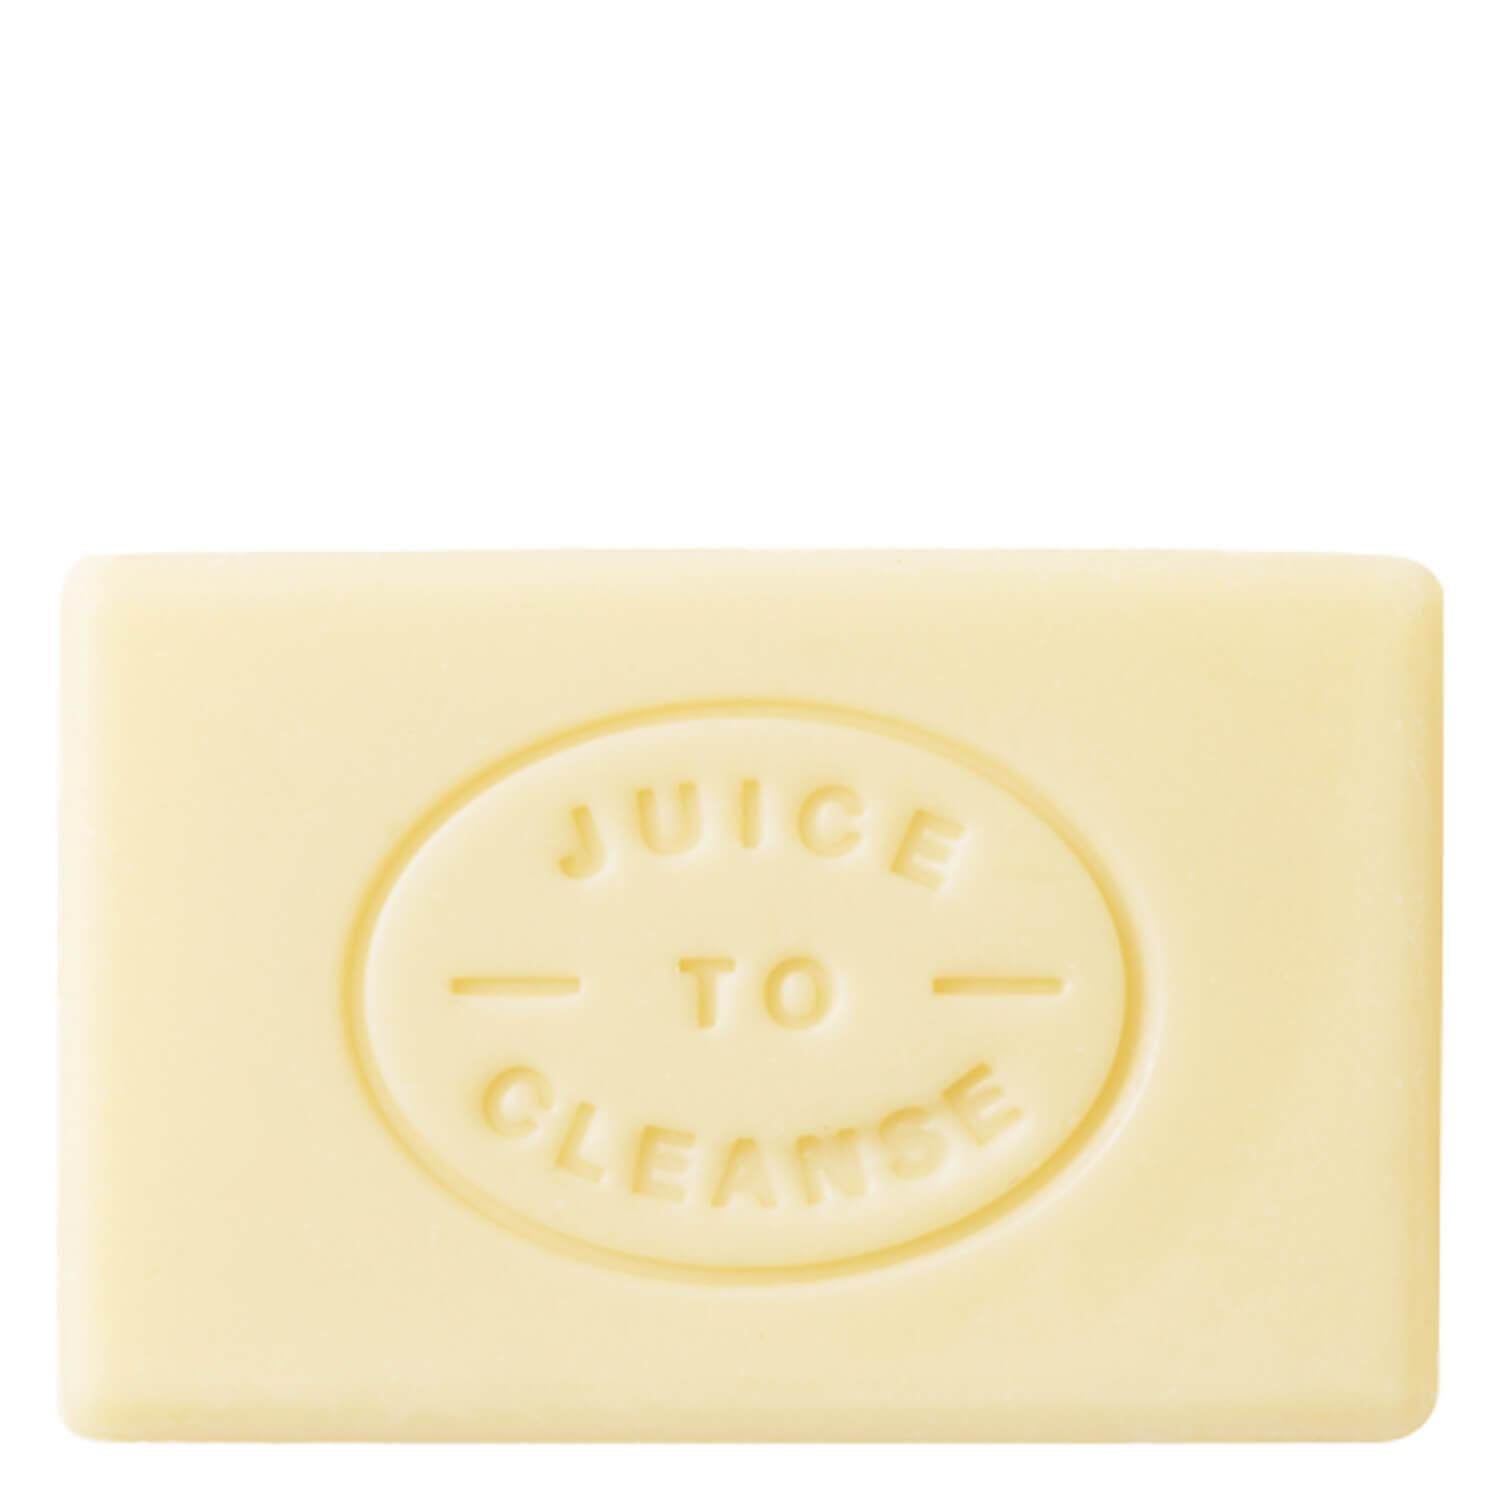 Juice to Cleanse - Clean Butter Cold Pressed Bar